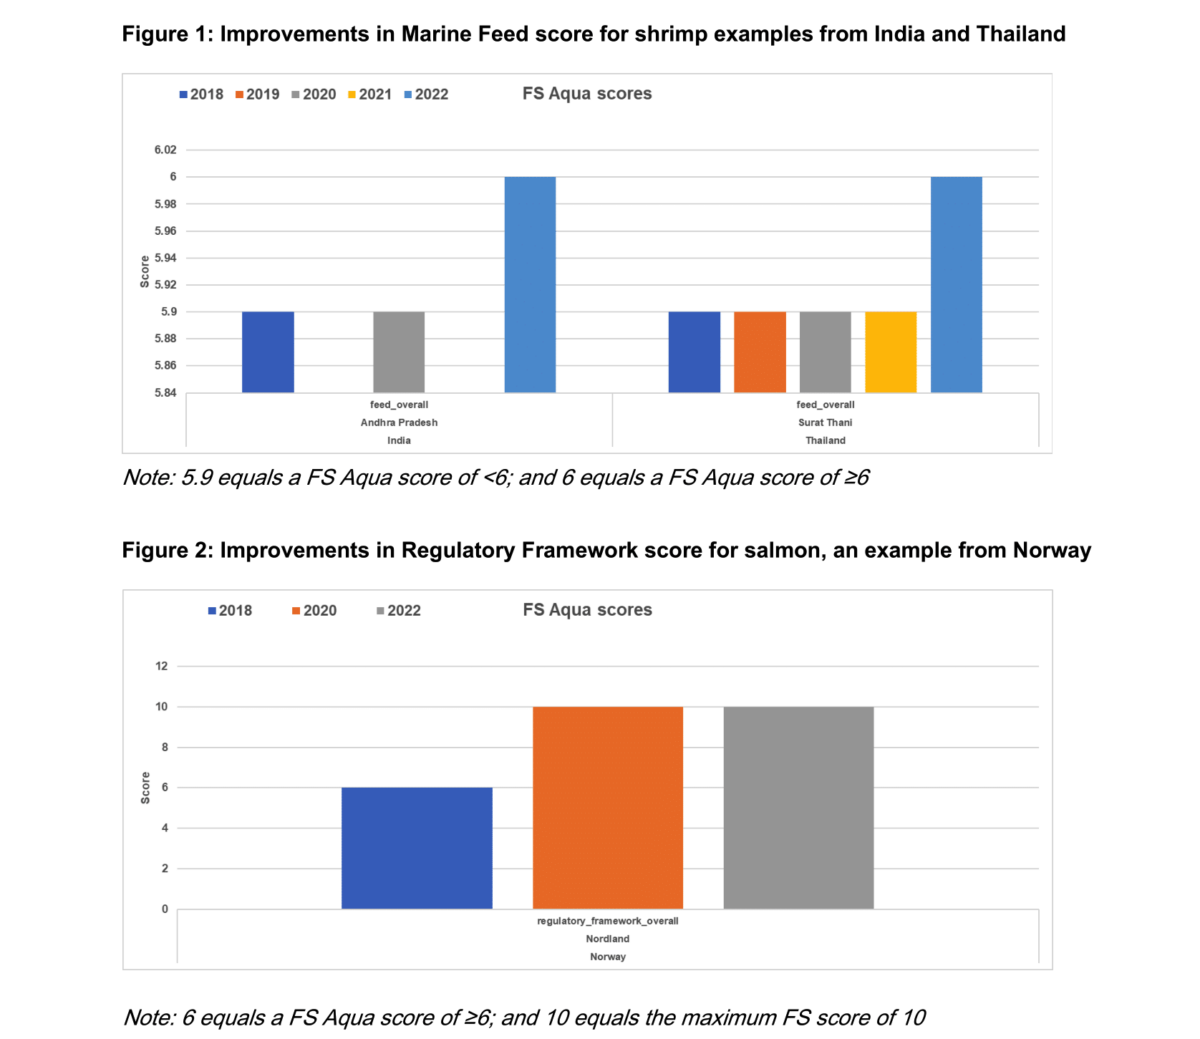 Bar graphs showing improvements in FishSource scores for shimp in India and Thailand, and salmon in Norway